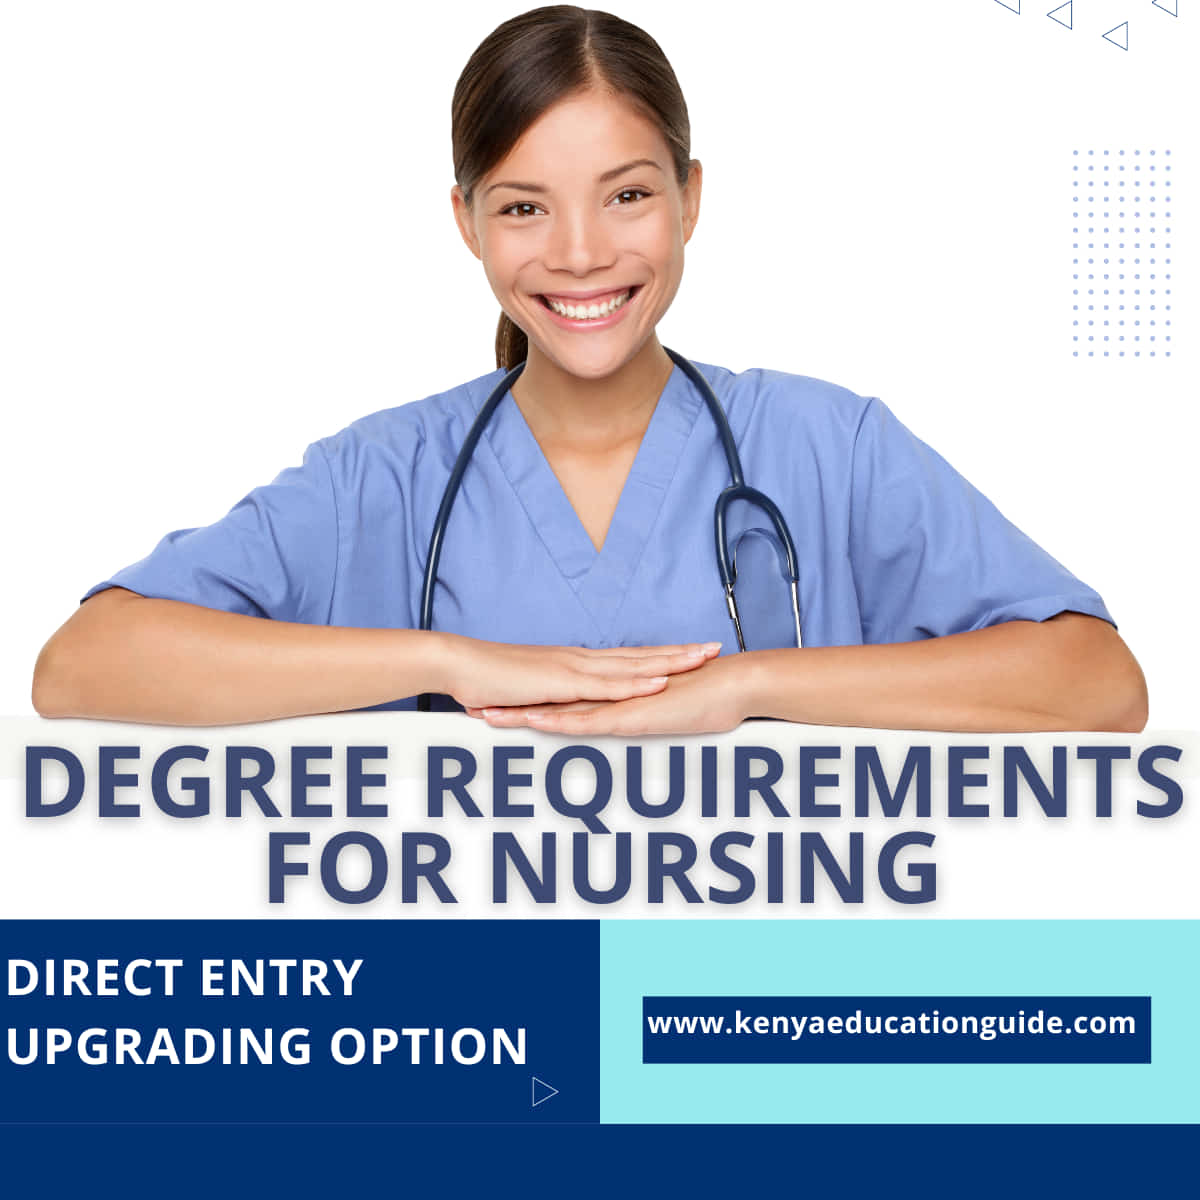 Degree requirements for nursing